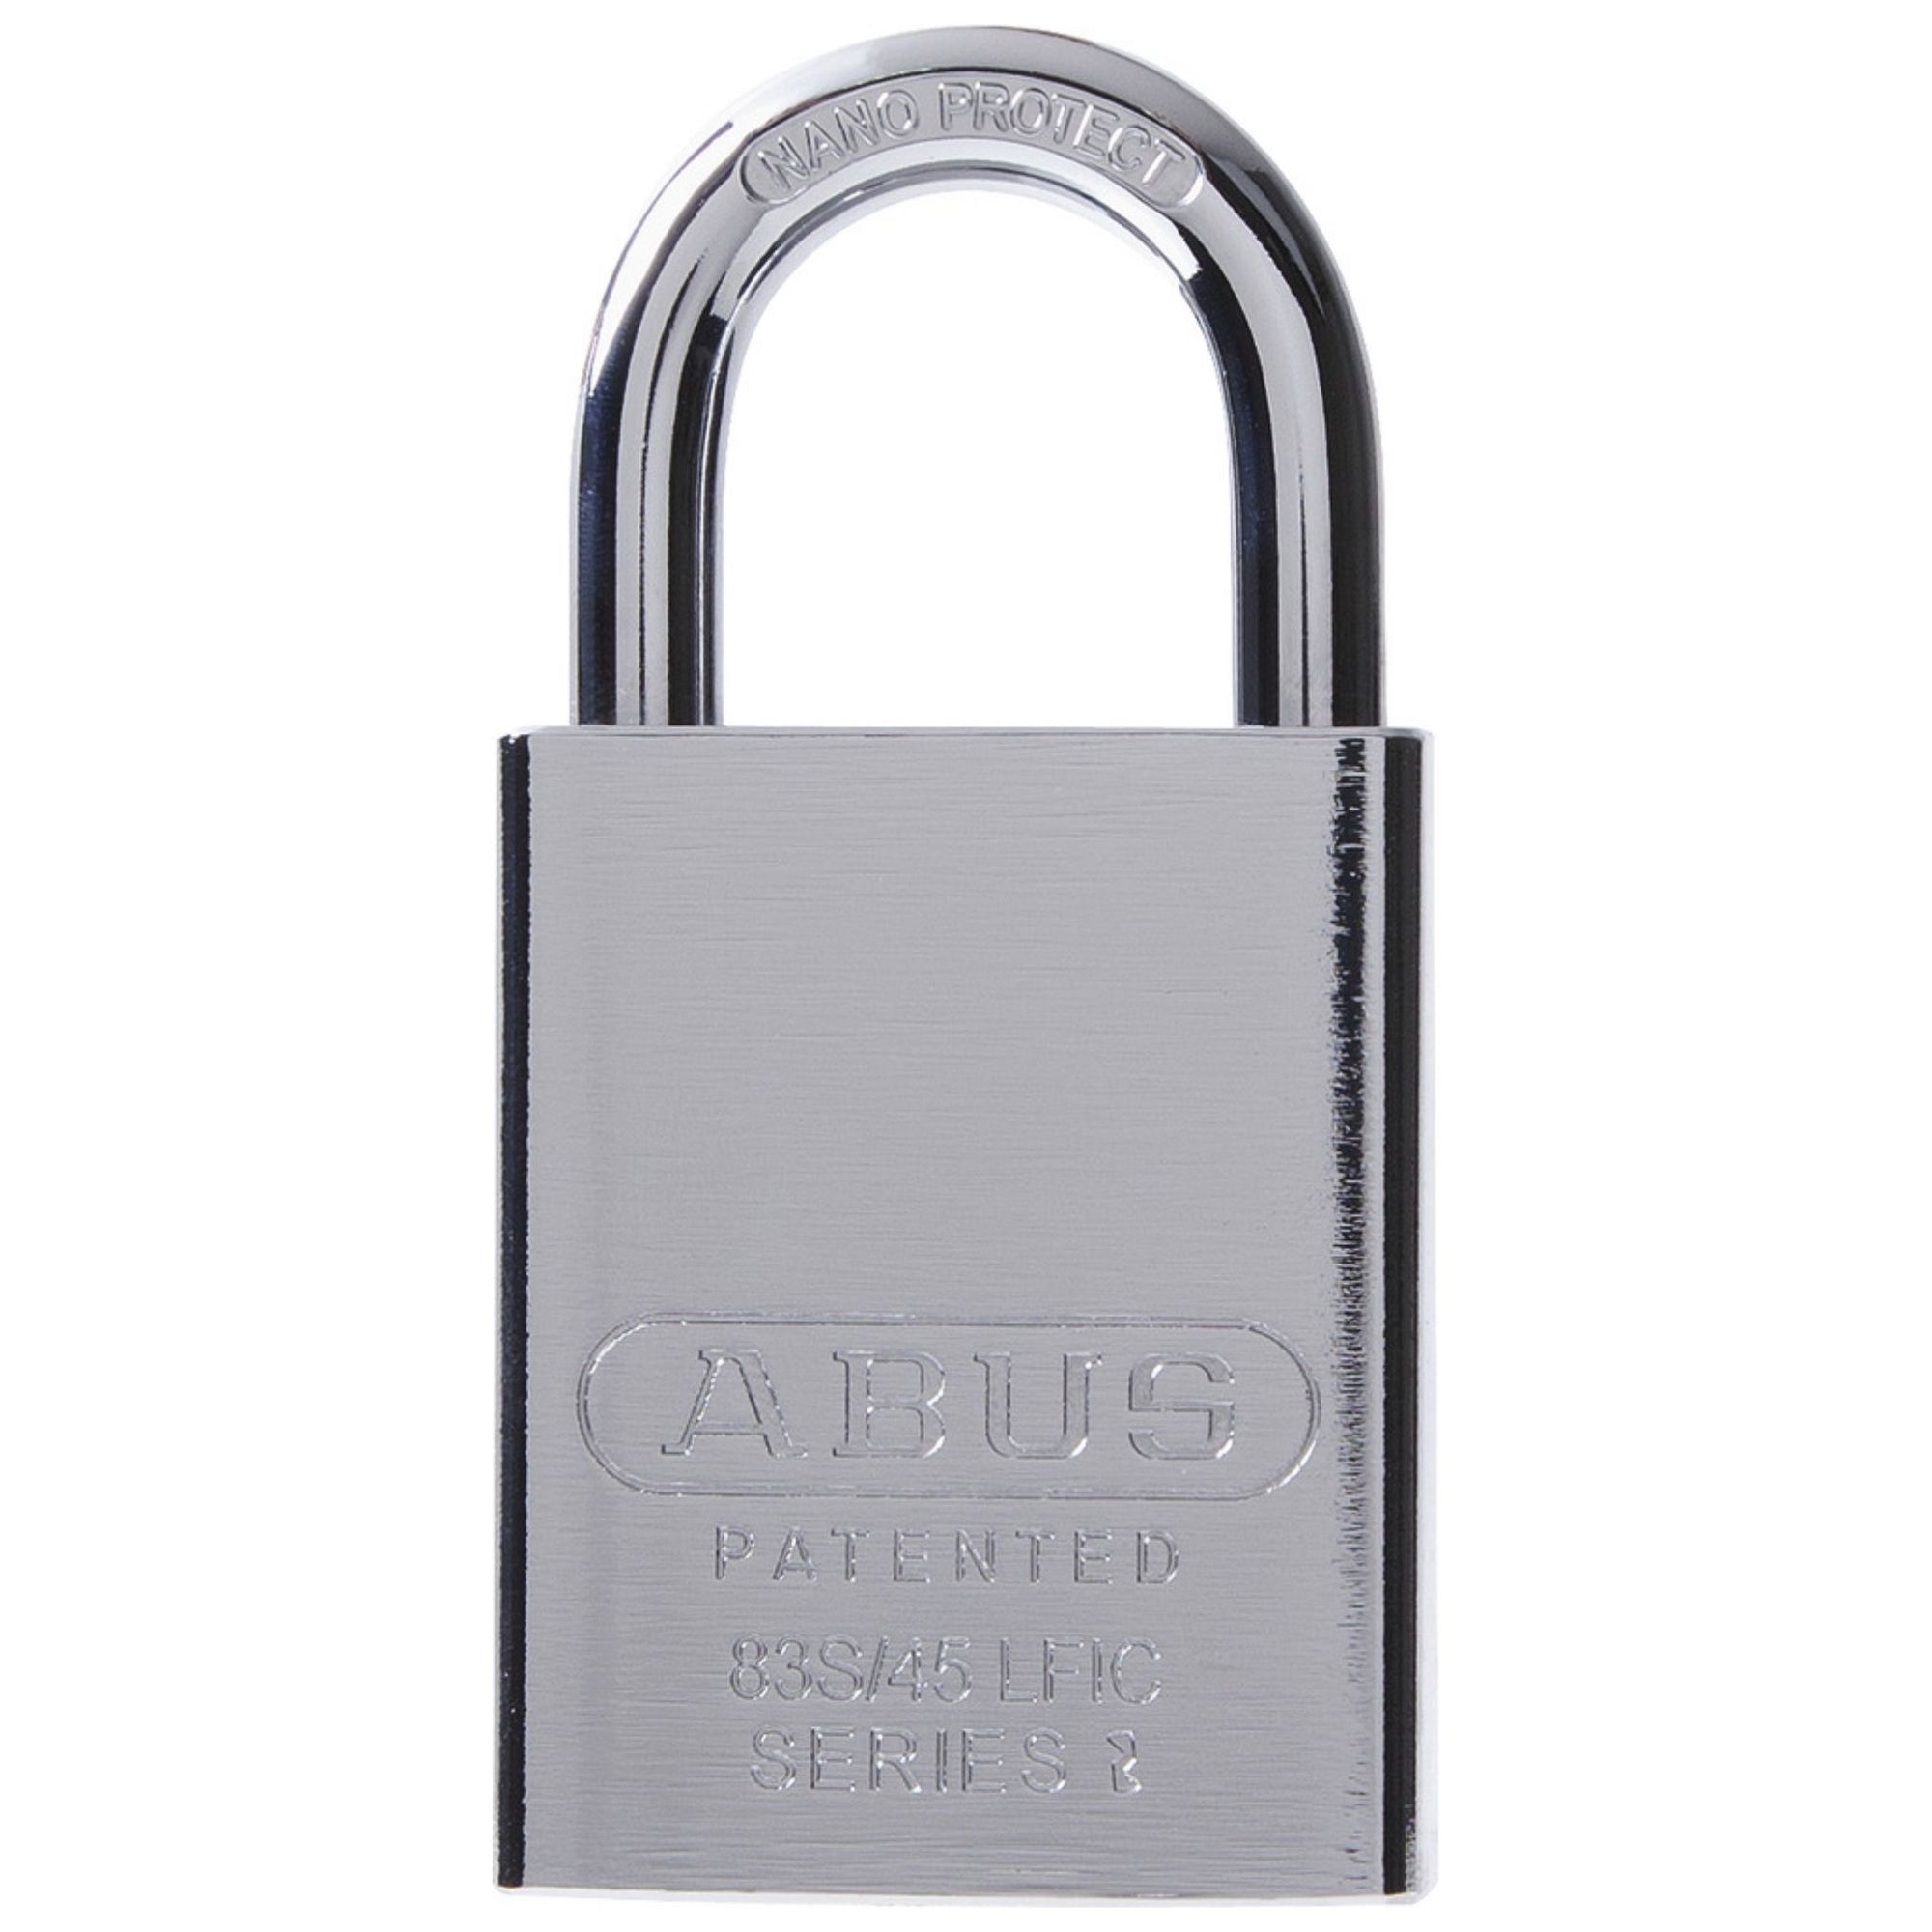 Abus 83S/45 LFIC Hardened Steel Locks Prepped to Accept Schlage Large Format IC Core Cylinders - The Lock Source